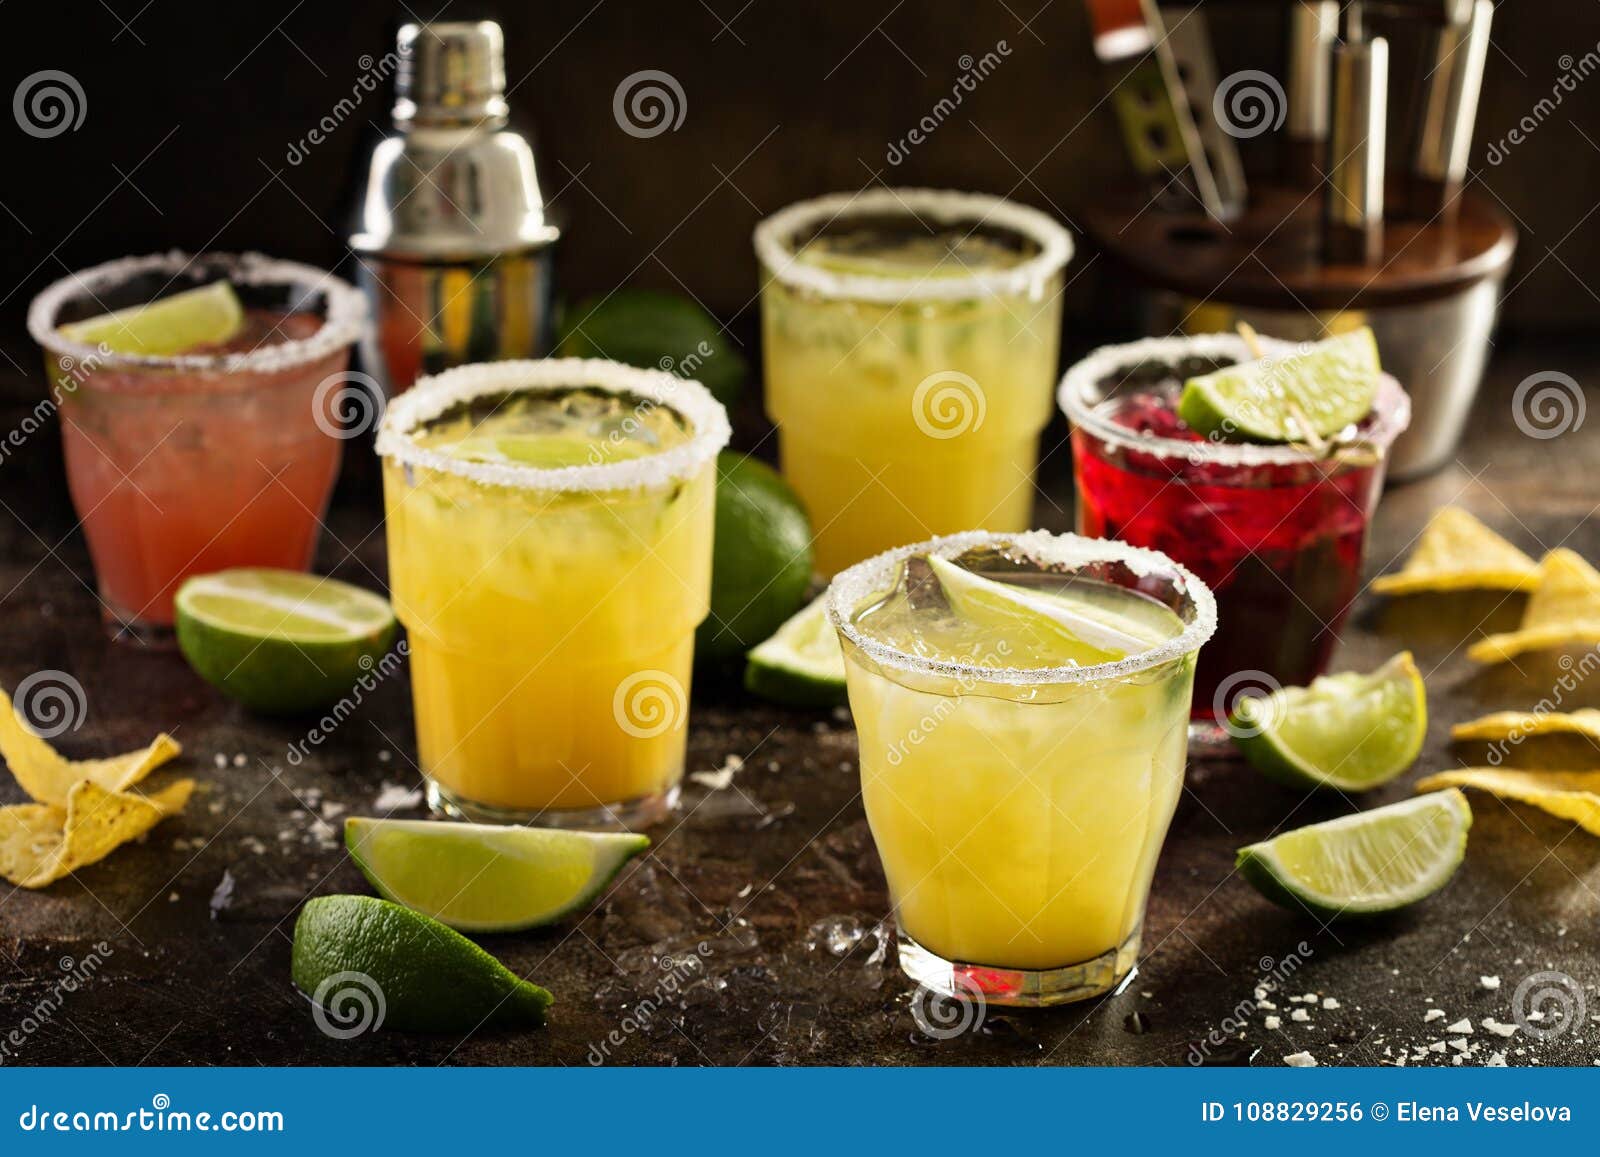 Variety of Margarita Cocktails Stock Photo - Image of drink, mixed ...